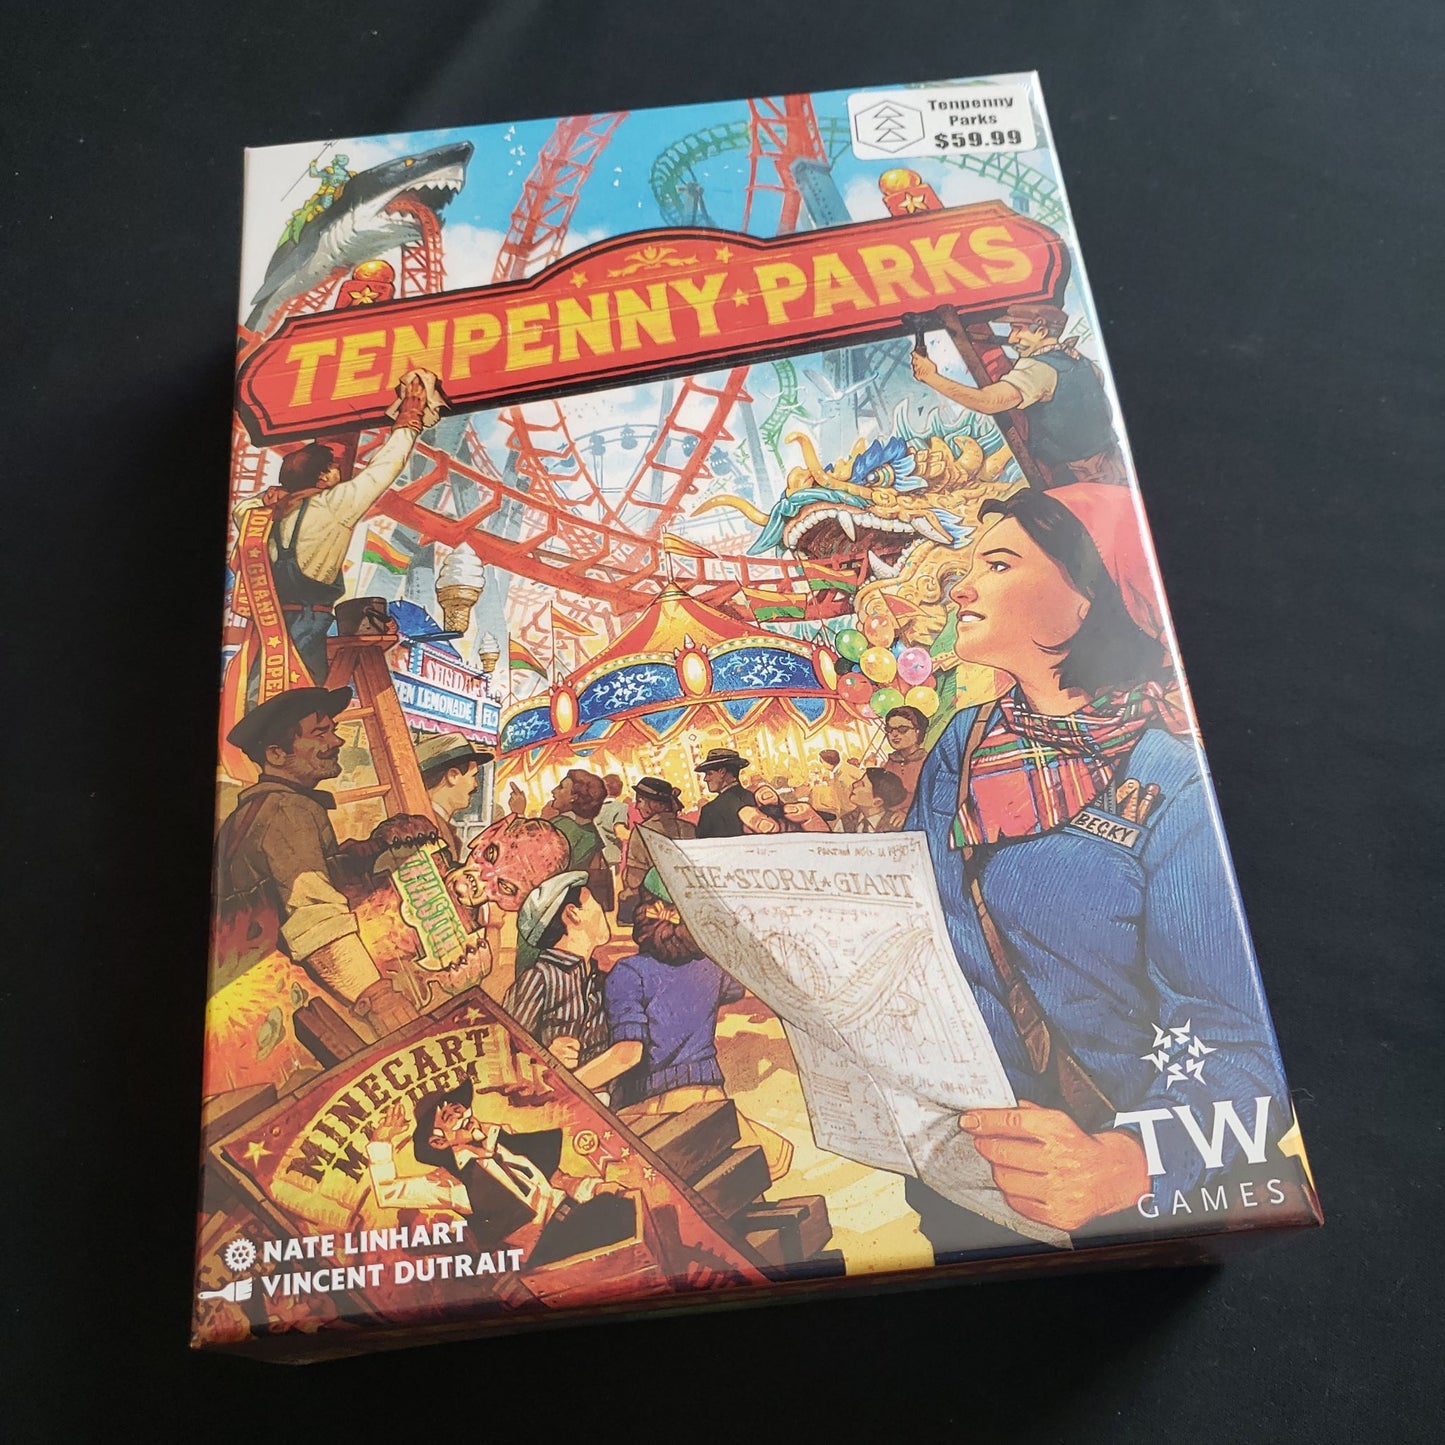 Tenpenny Parks board game - front cover of box